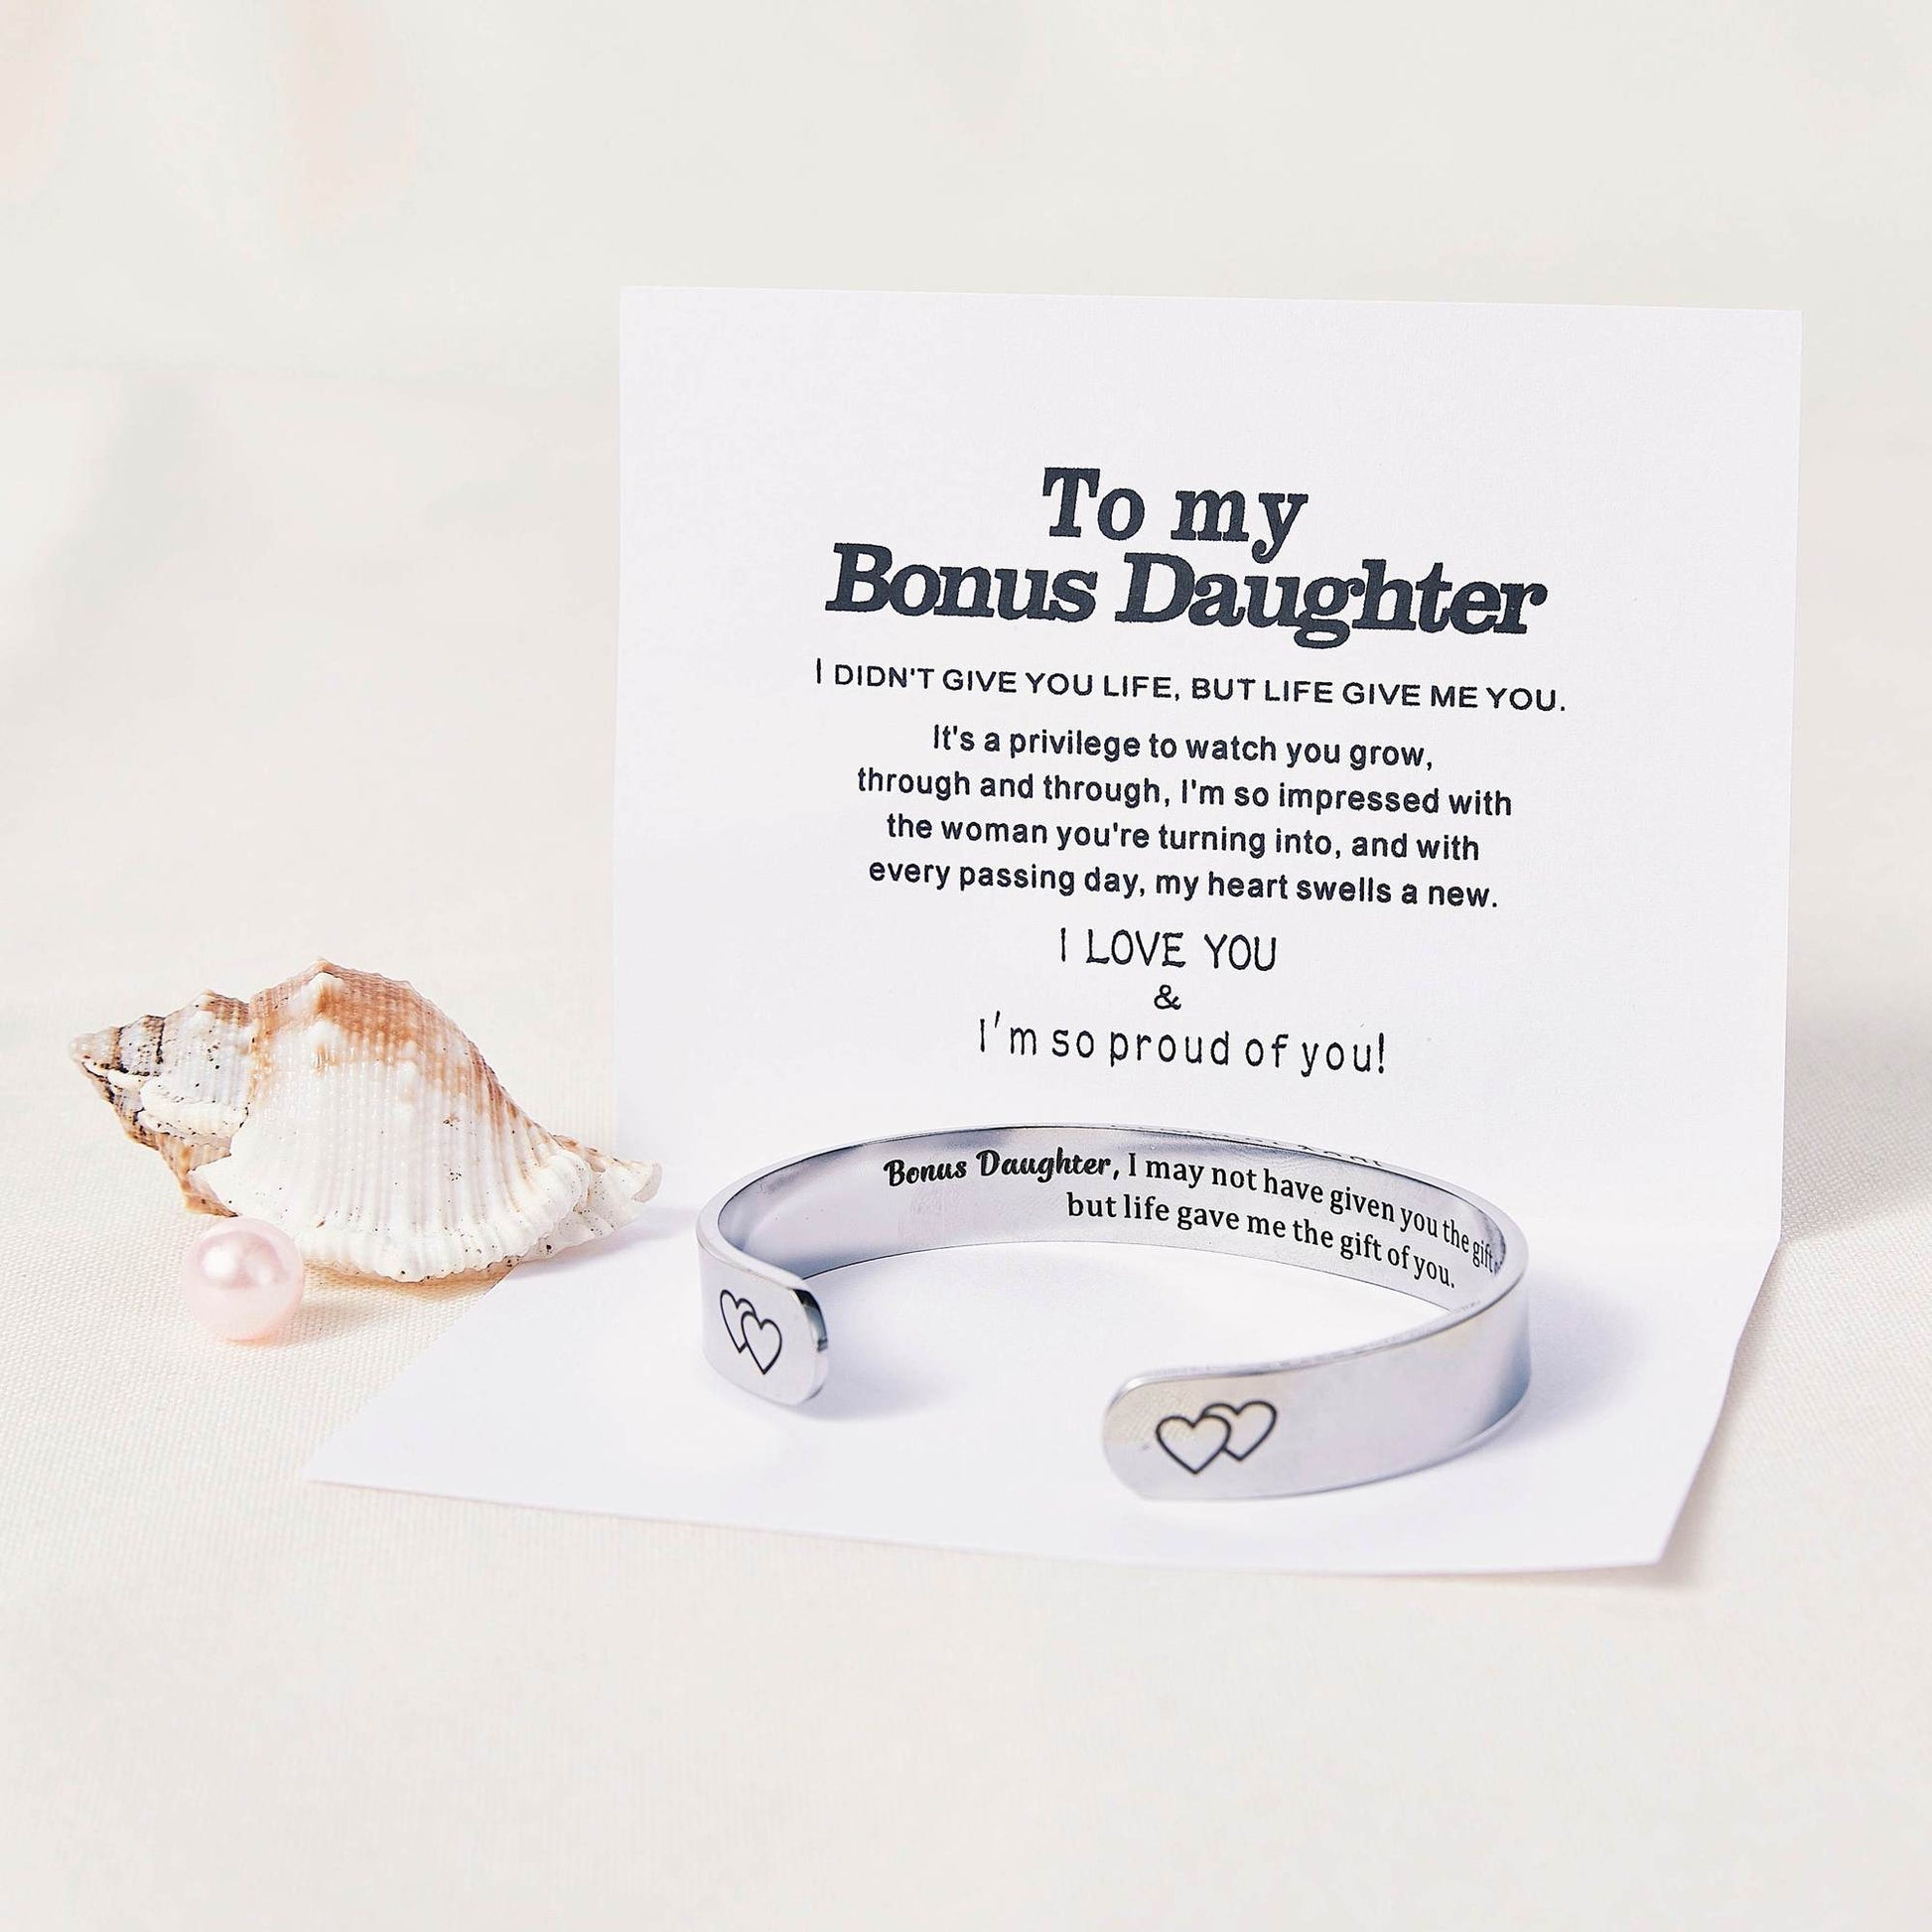 TO MY BONUS DAUGHTER "BONUS DAUGHTER, I MAY NOT HAVE GIVEN YOU THE GIFT OF LIFE. BUT LIFE GAVE ME THE GIFT OF YOU" BRACELET - SARAH'S WHISPER